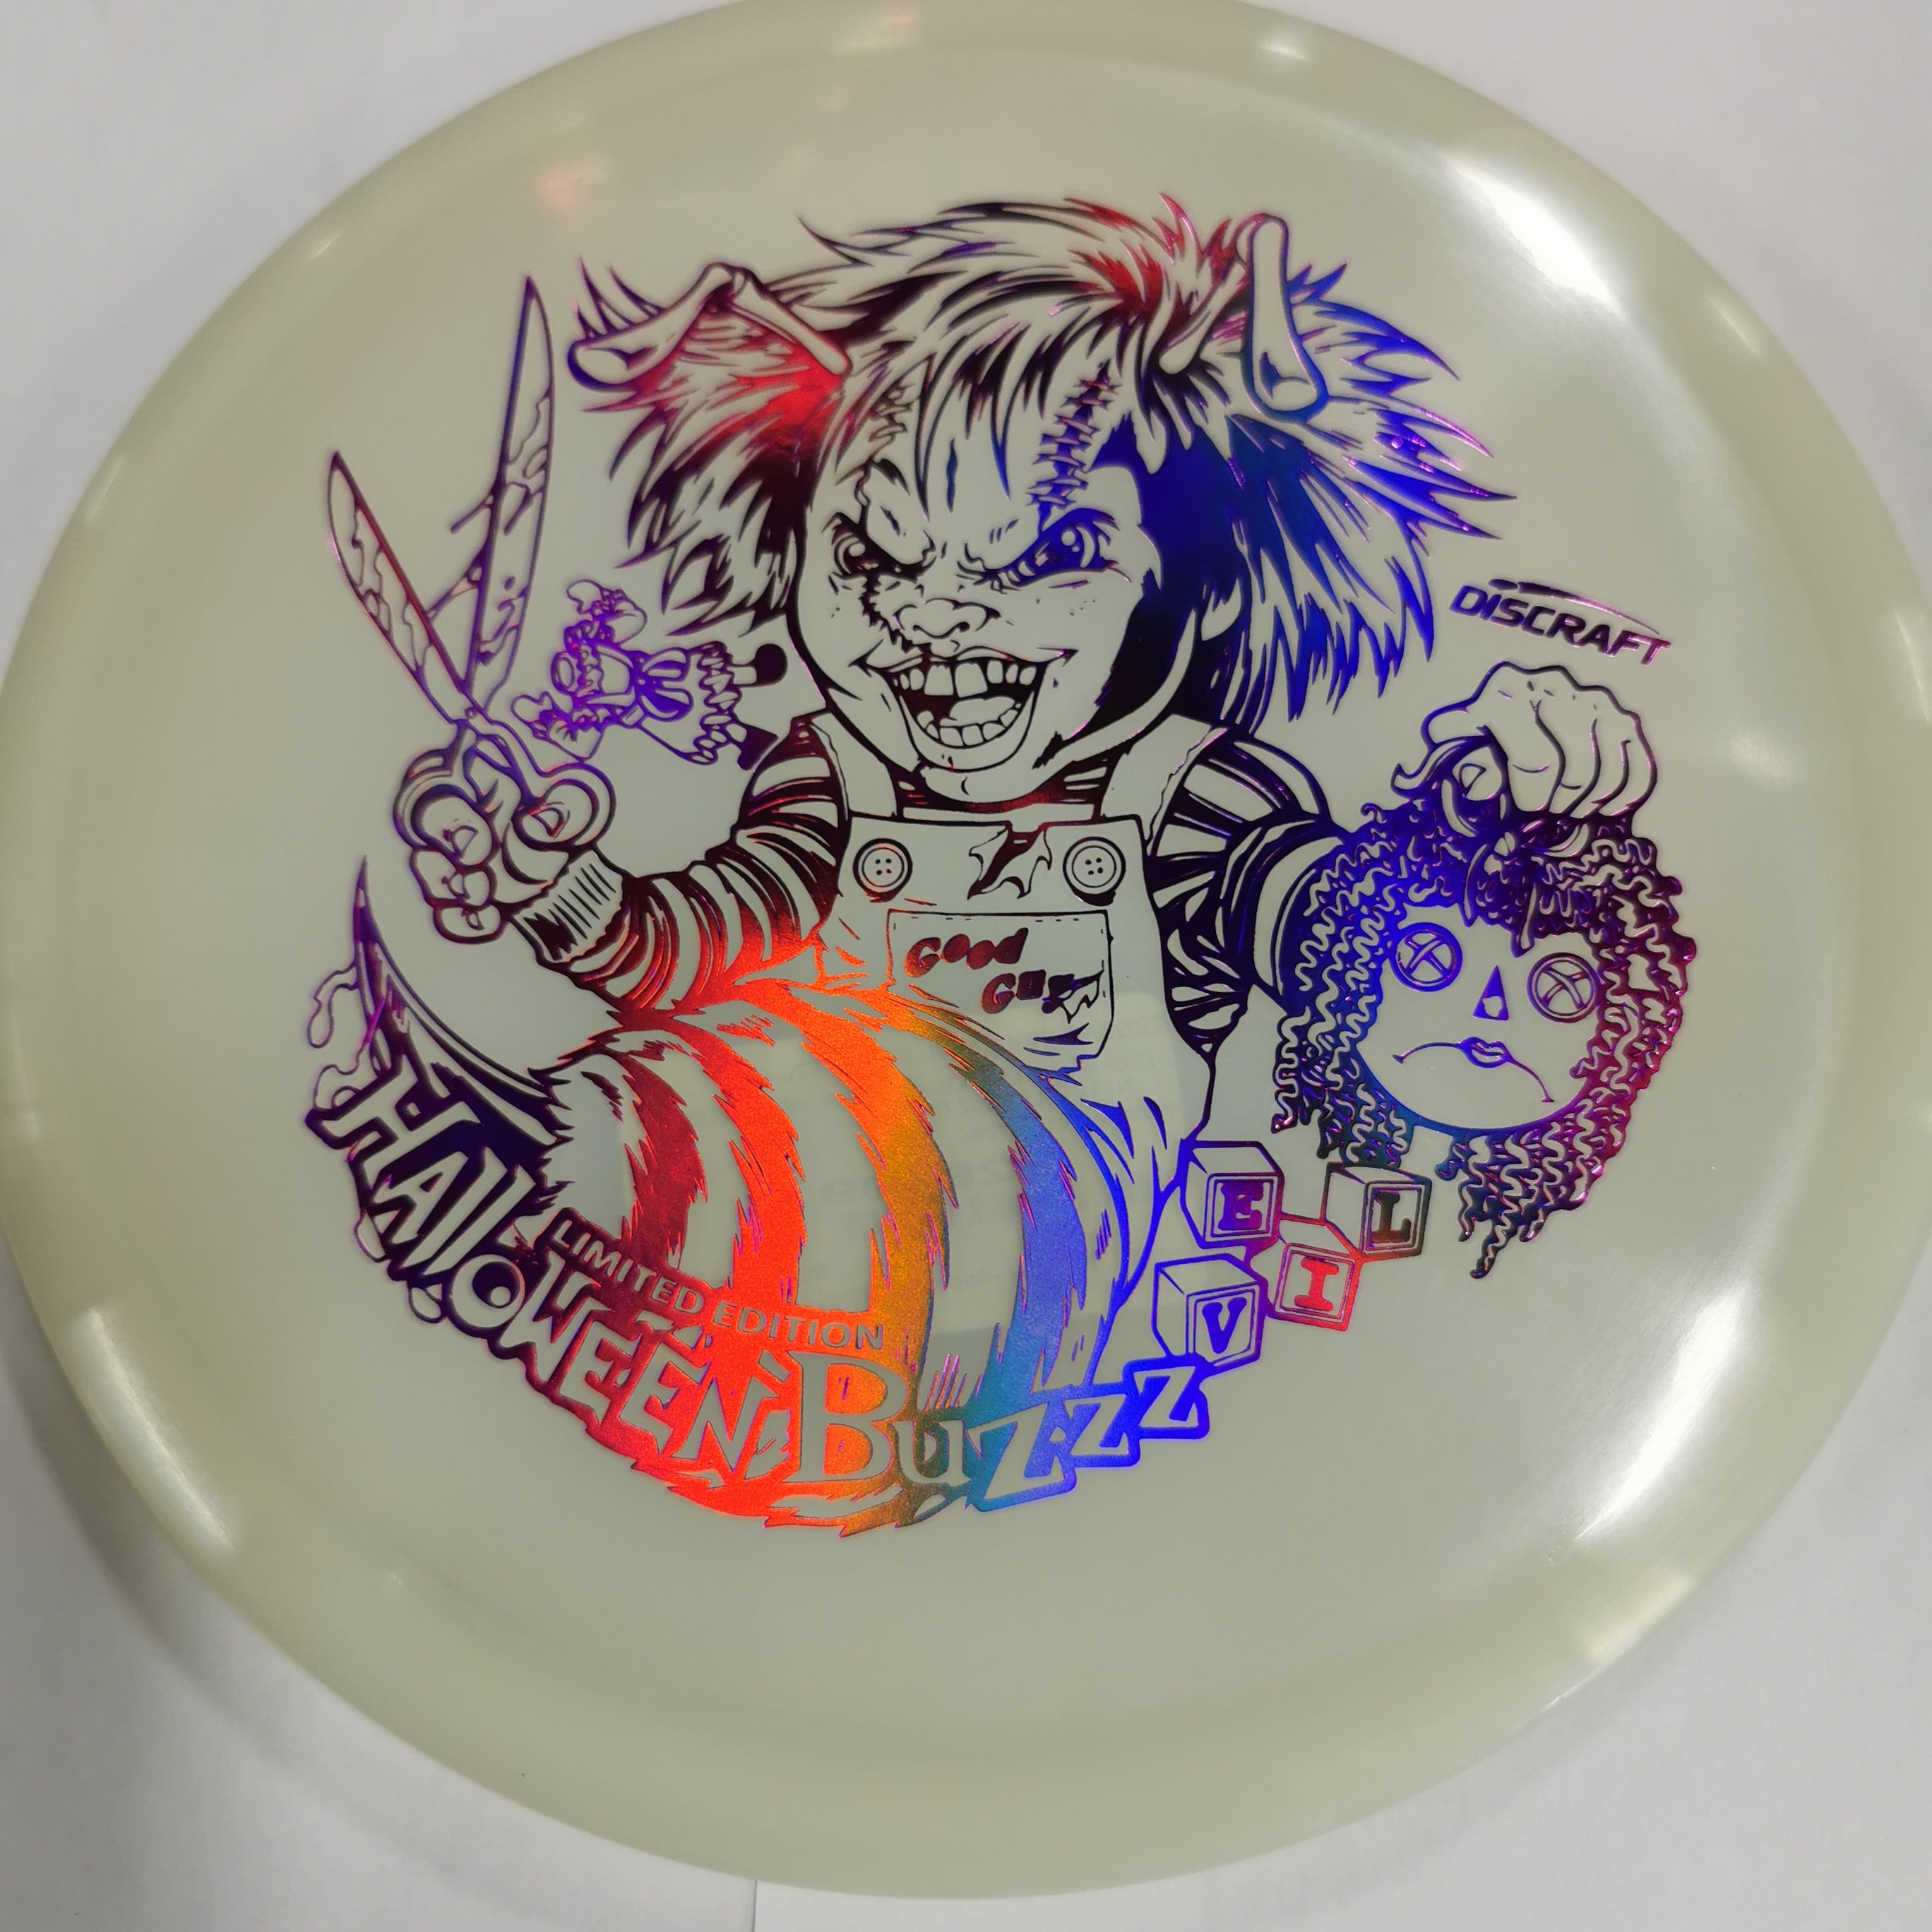 DISCRAFT LIMITED EDITION HALLOWEEN Z- NITE GLO BUZZZ-Sports Replay - Sports Excellence-Sports Replay - Sports Excellence